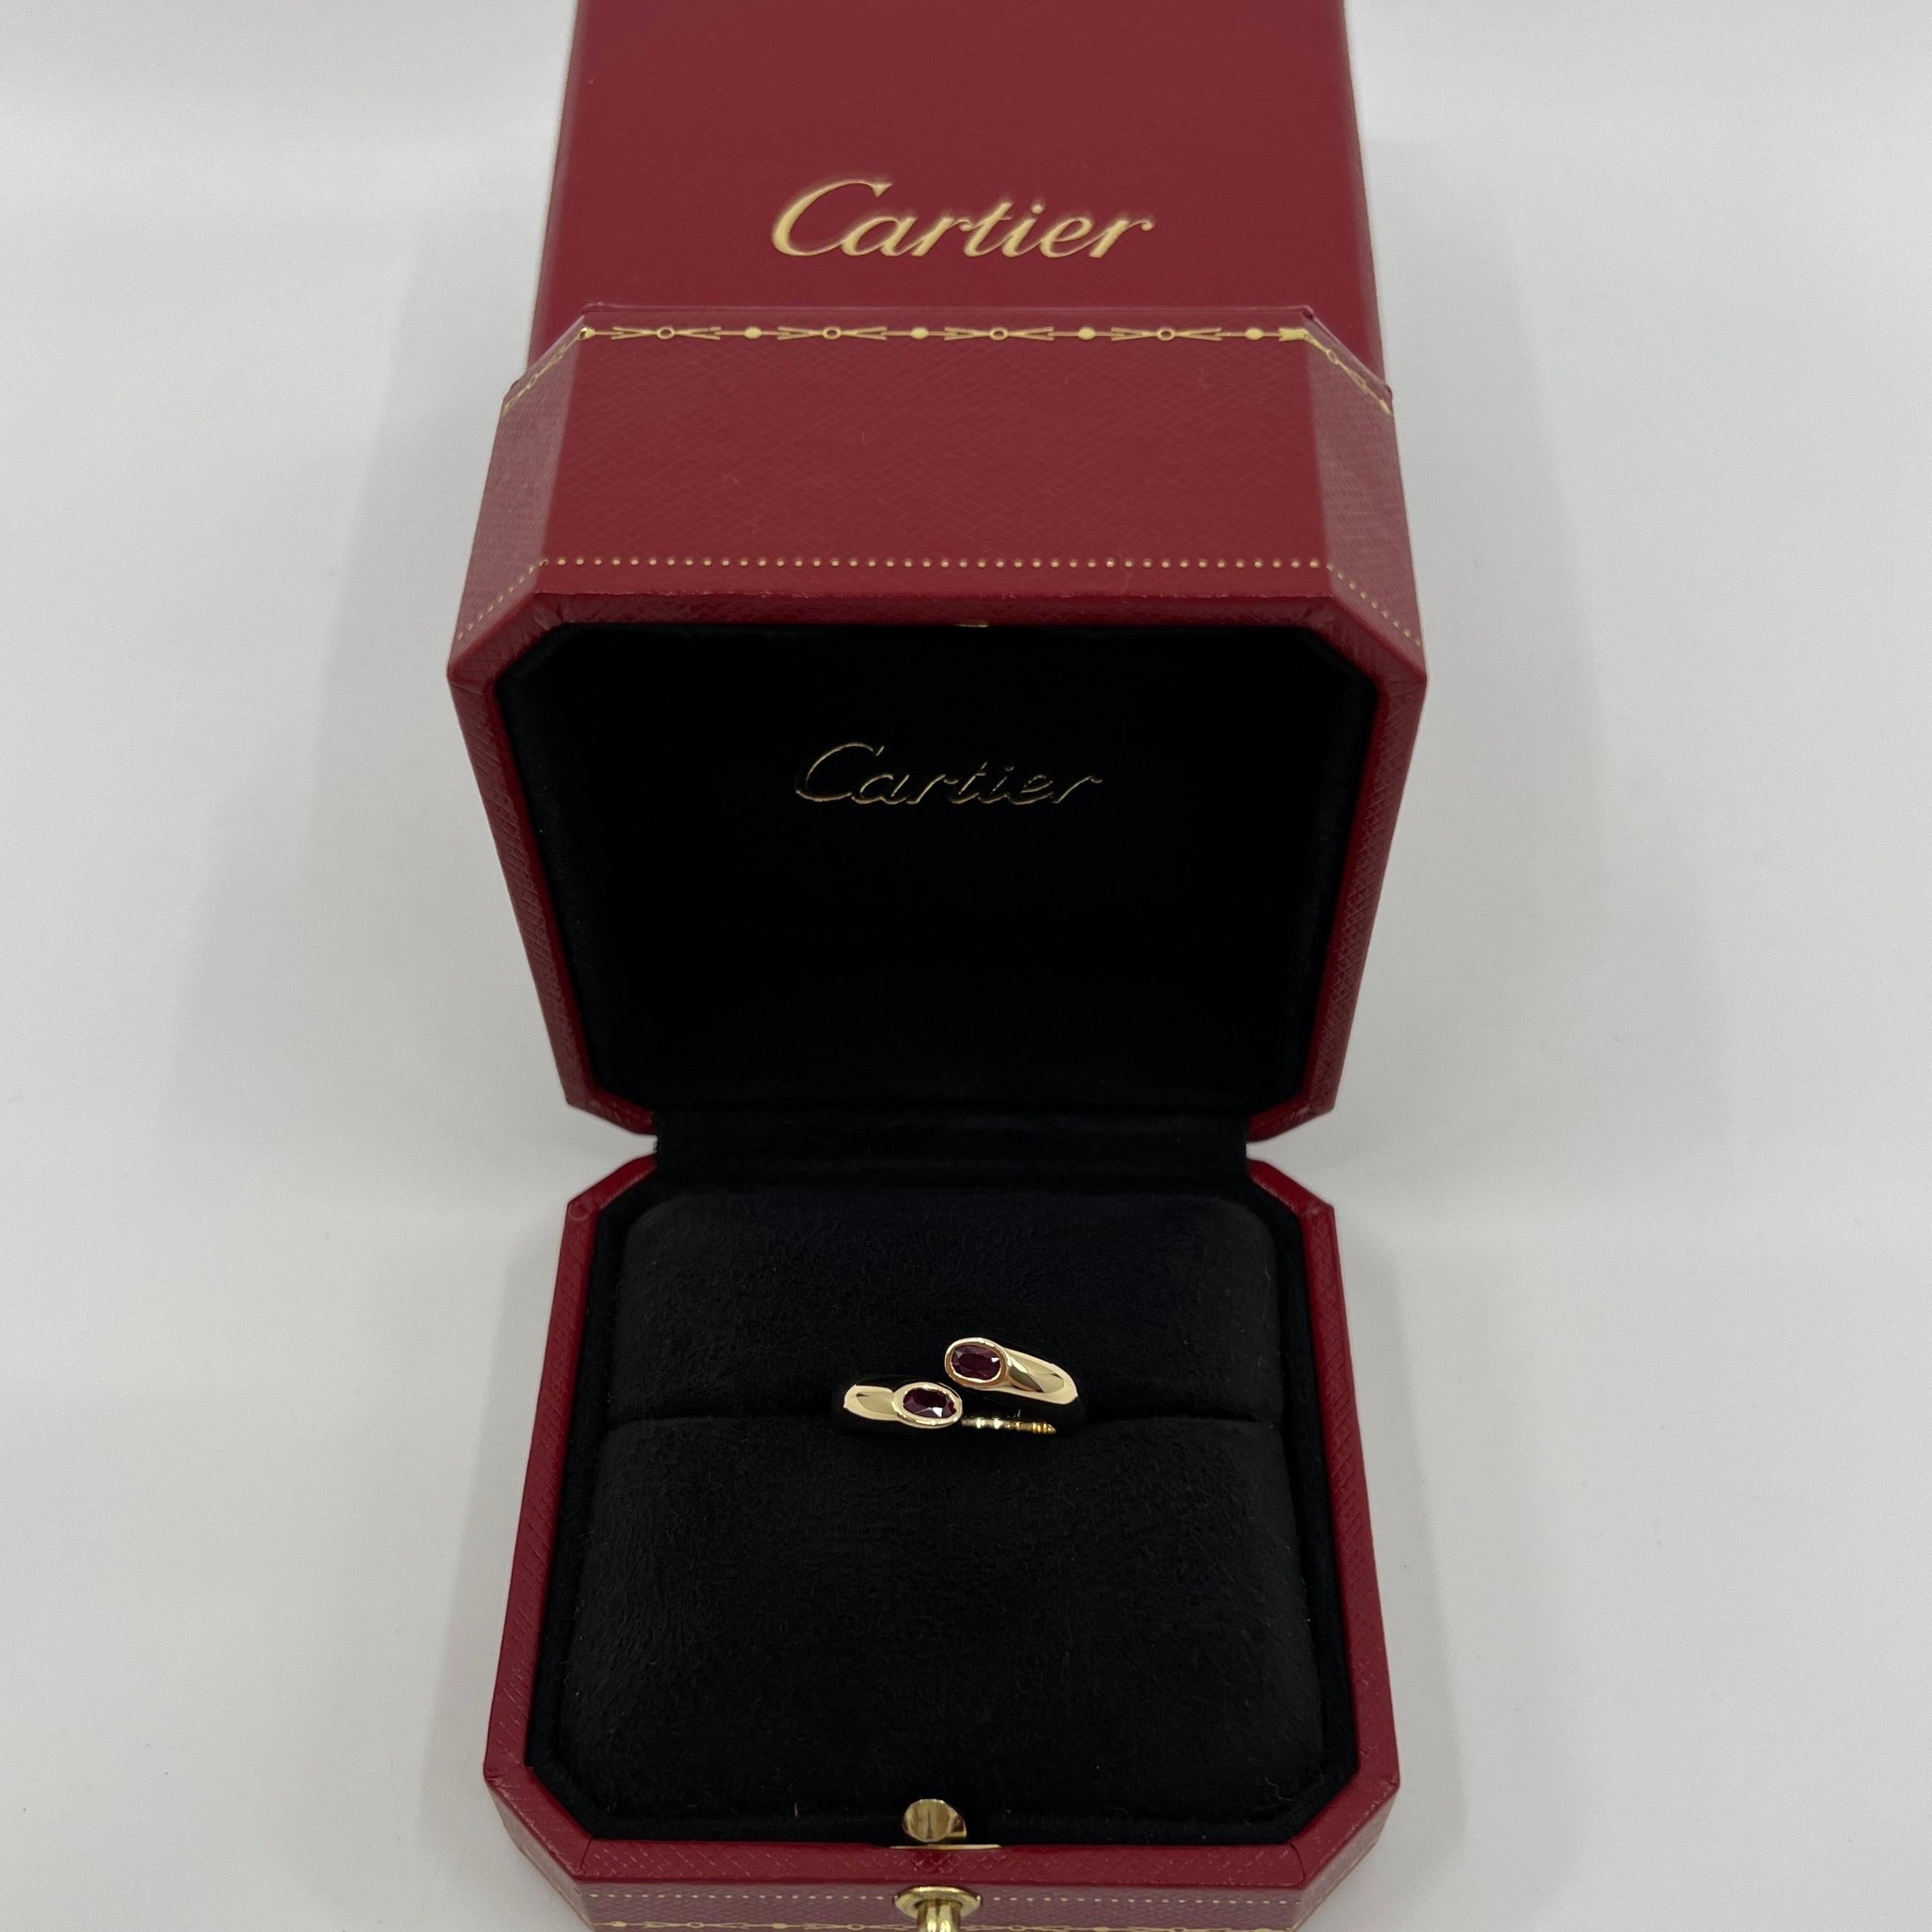 Vintage Cartier Oval Cut Red Ruby 18k Yellow Gold Split Bypass Ring.

Stunning yellow gold ring set with 2 fine bright red oval cut rubies. Fine jewellery houses like Cartier only use the finest of gemstones and these rubies are no exception.

Two